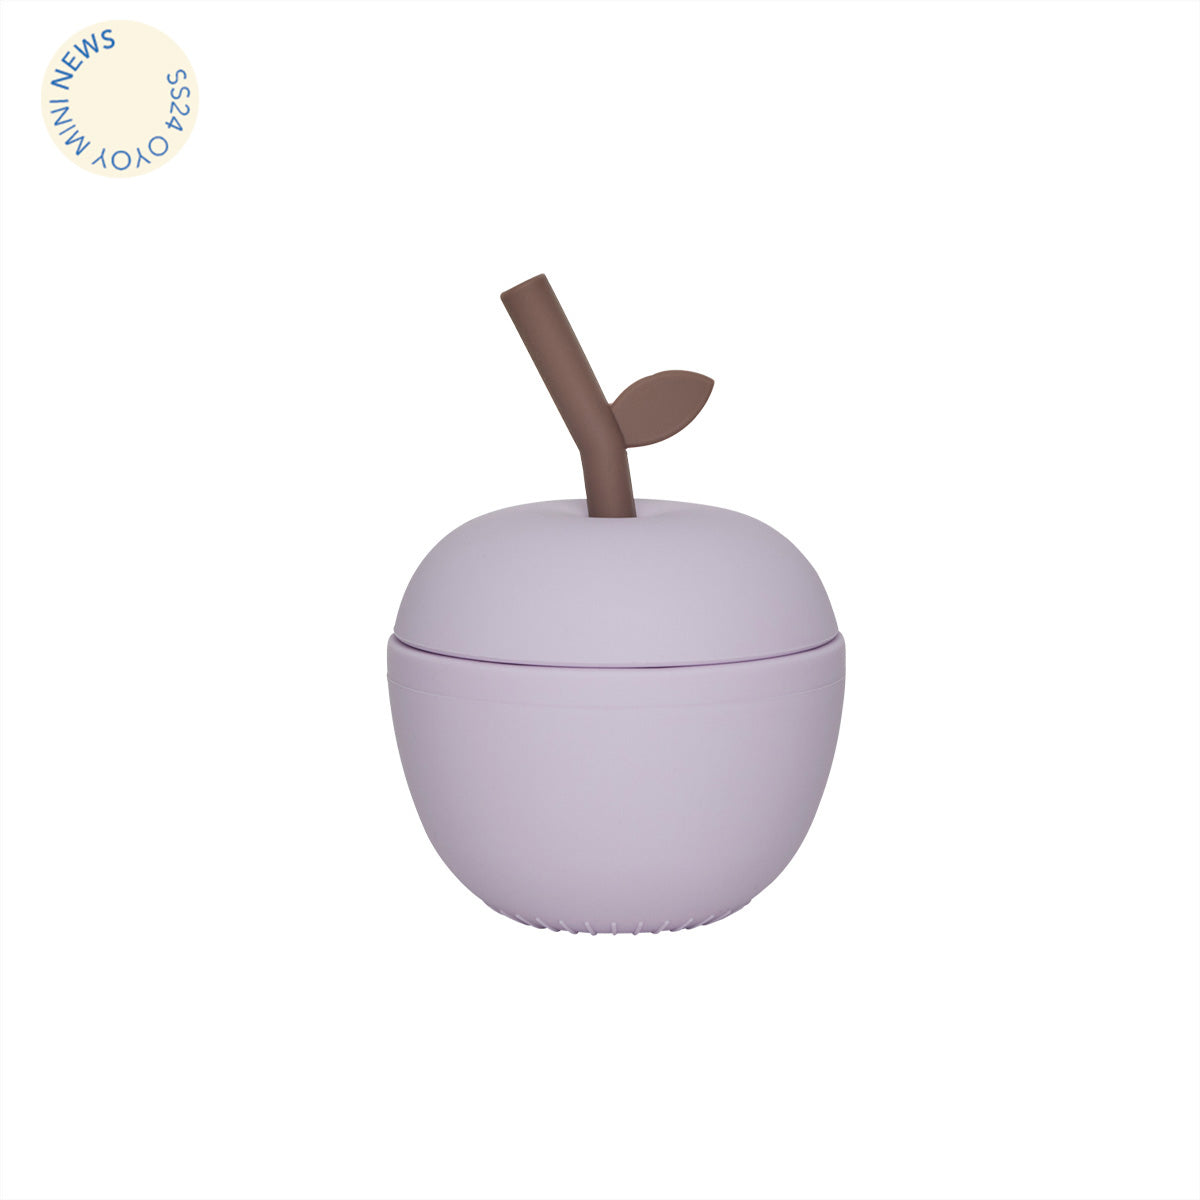 OYOY MINI Apple Cup Dining Ware 501 Lavender